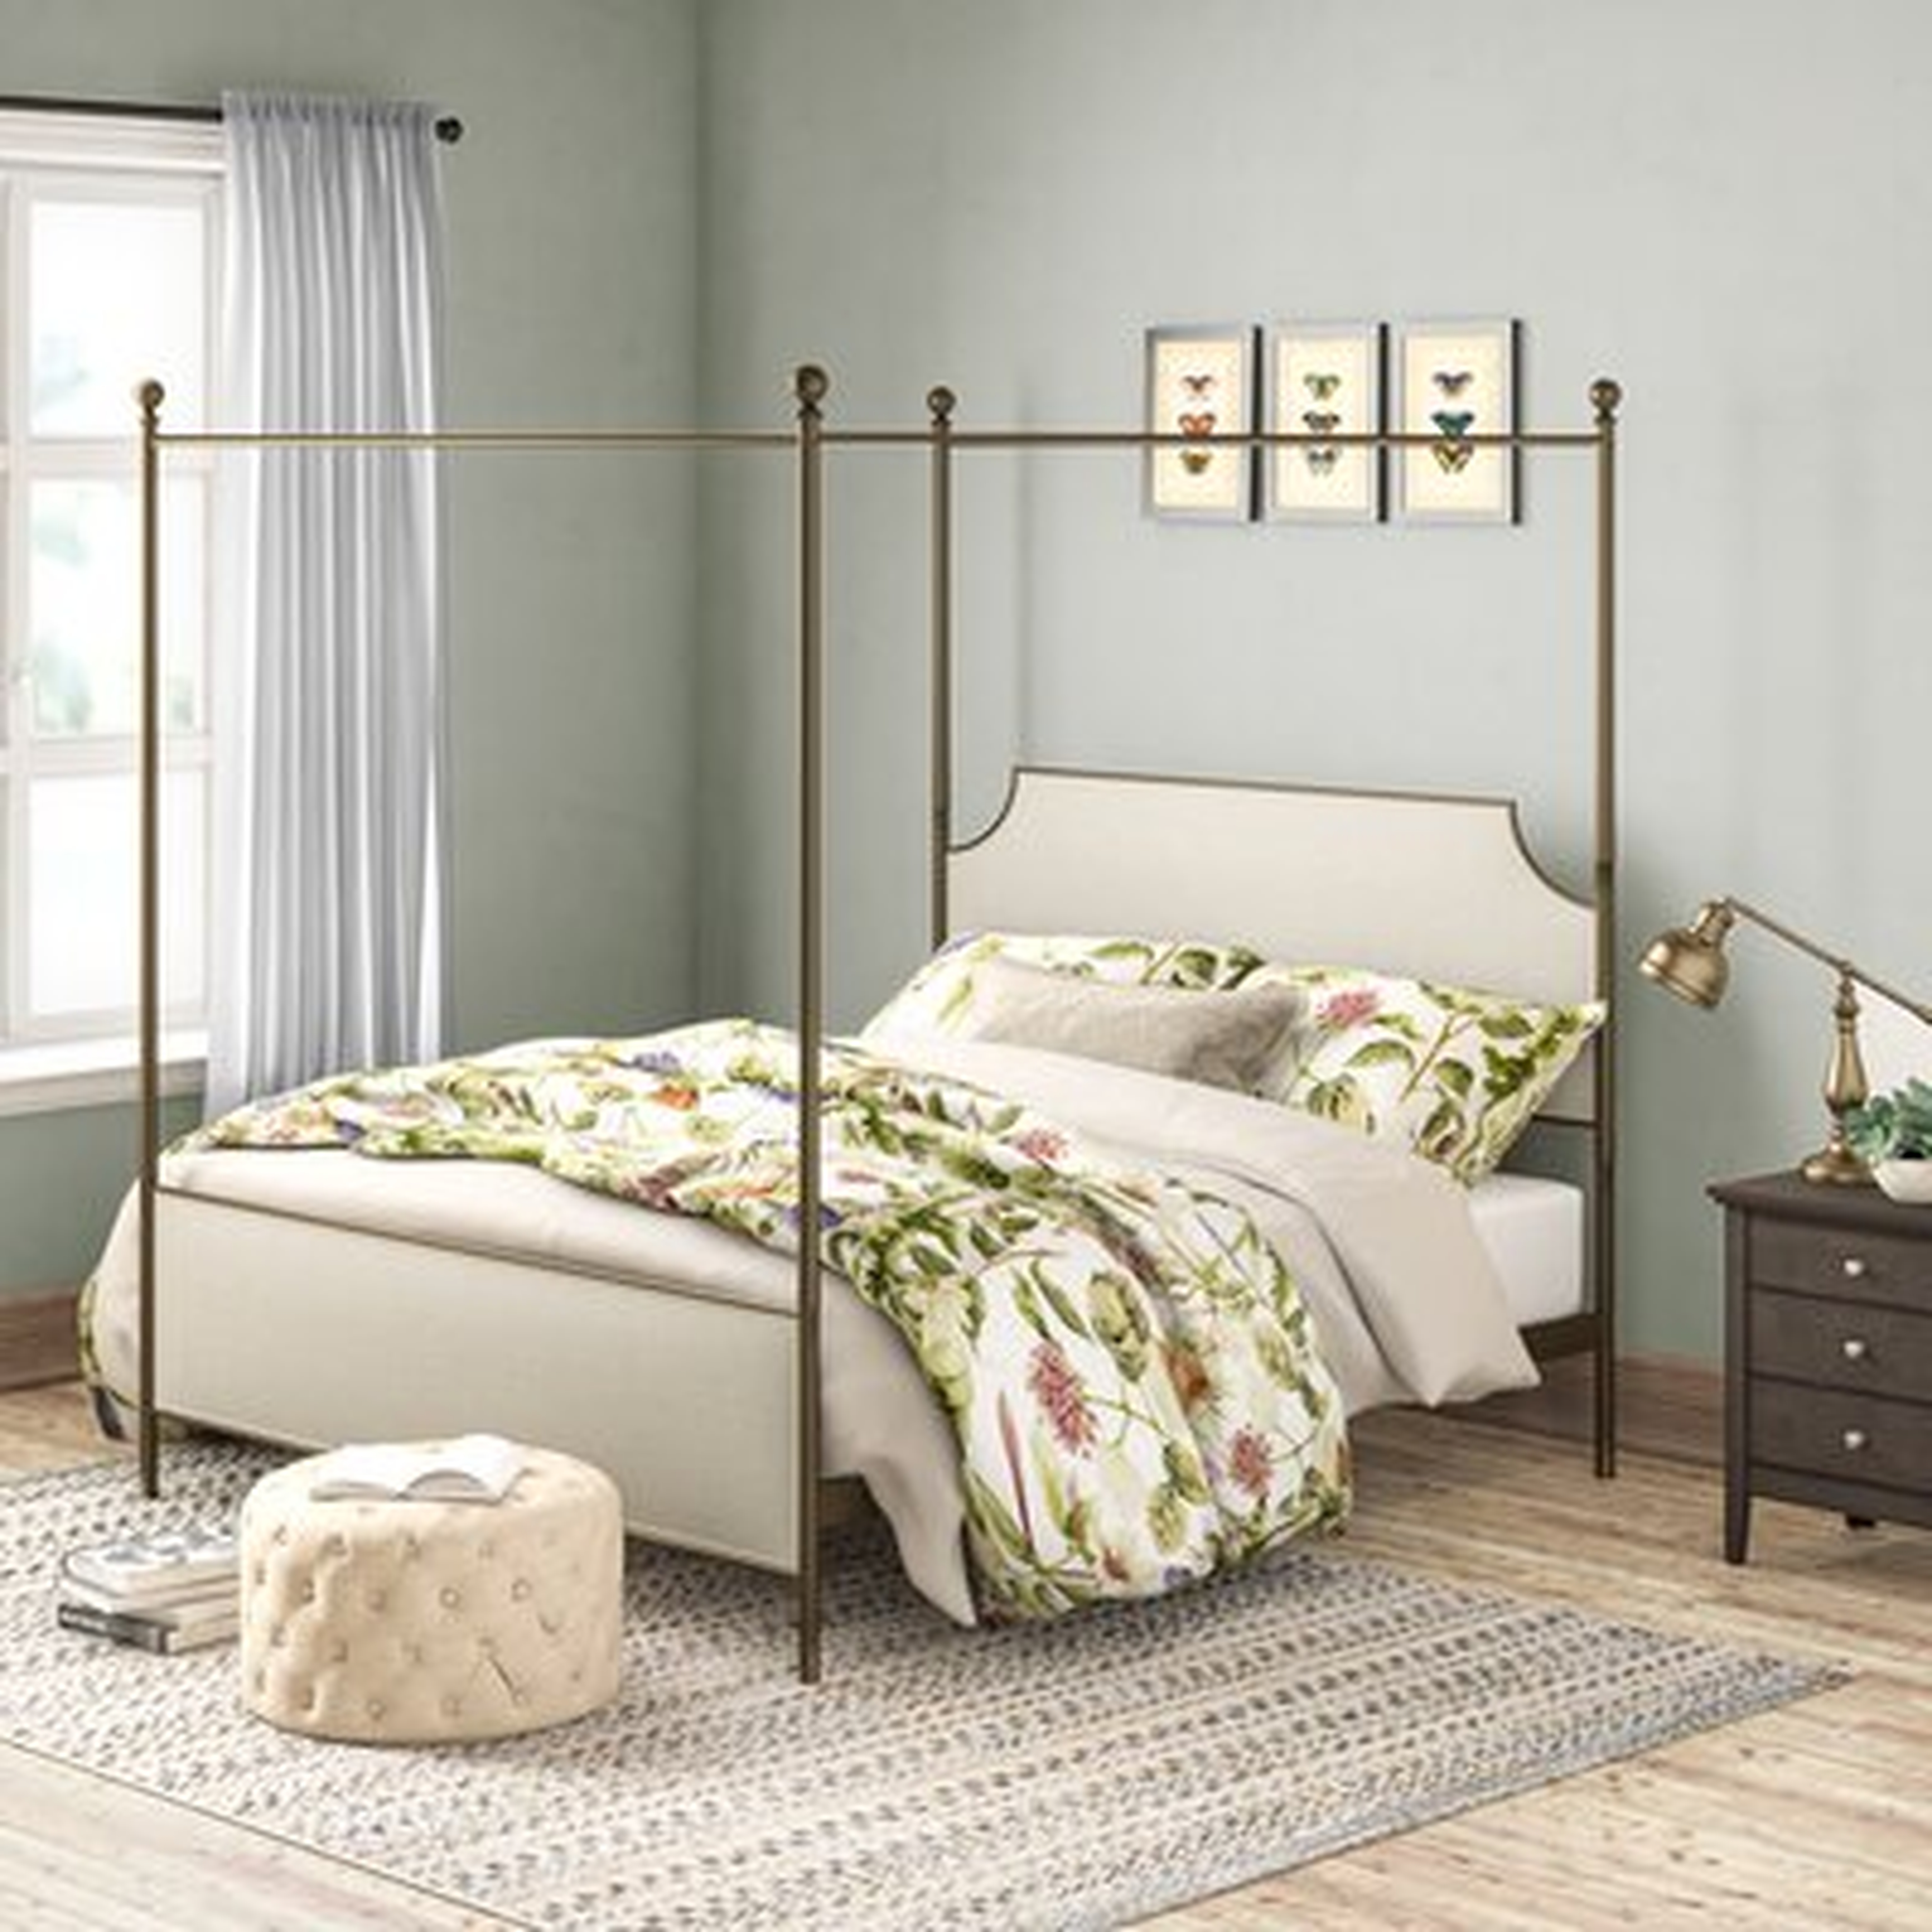 Willison Bedroom Collection Upholstered Canopy Bed - Birch Lane